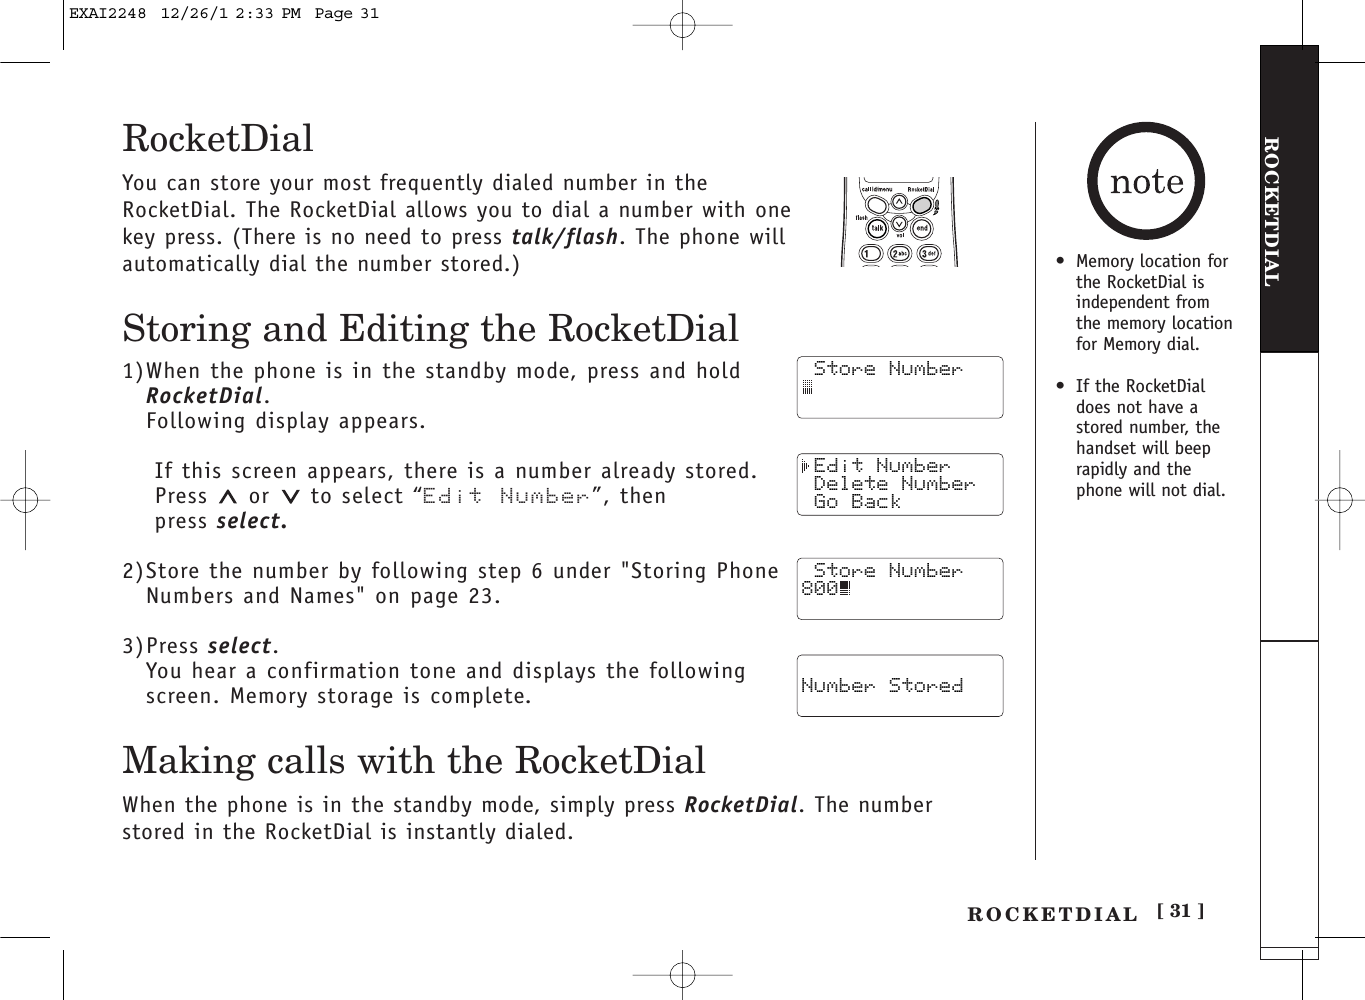 [ 31 ]ROCKETDIALROCKETDIALRocketDialYou can store your most frequently dialed number in theRocketDial. The RocketDial allows you to dial a number with onekey press. (There is no need to press talk/flash. The phone willautomatically dial the number stored.)Storing and Editing the RocketDial1)When the phone is in the standby mode, press and hold RocketDial.Following display appears.If this screen appears, there is a number already stored.Press or to select “Edit Number”, then press select.2)Store the number by following step 6 under &quot;Storing PhoneNumbers and Names&quot; on page 23.3)Press select.You hear a confirmation tone and displays the followingscreen. Memory storage is complete.Making calls with the RocketDialWhen the phone is in the standby mode, simply press RocketDial. The numberstored in the RocketDial is instantly dialed. Store Number Edit Number Delete Number Go Back Number Stored Store Number800•Memory location for the RocketDial isindependent fromthe memory locationfor Memory dial.•If the RocketDialdoes not have astored number, thehandset will beeprapidly and thephone will not dial.EXAI2248  12/26/1 2:33 PM  Page 31